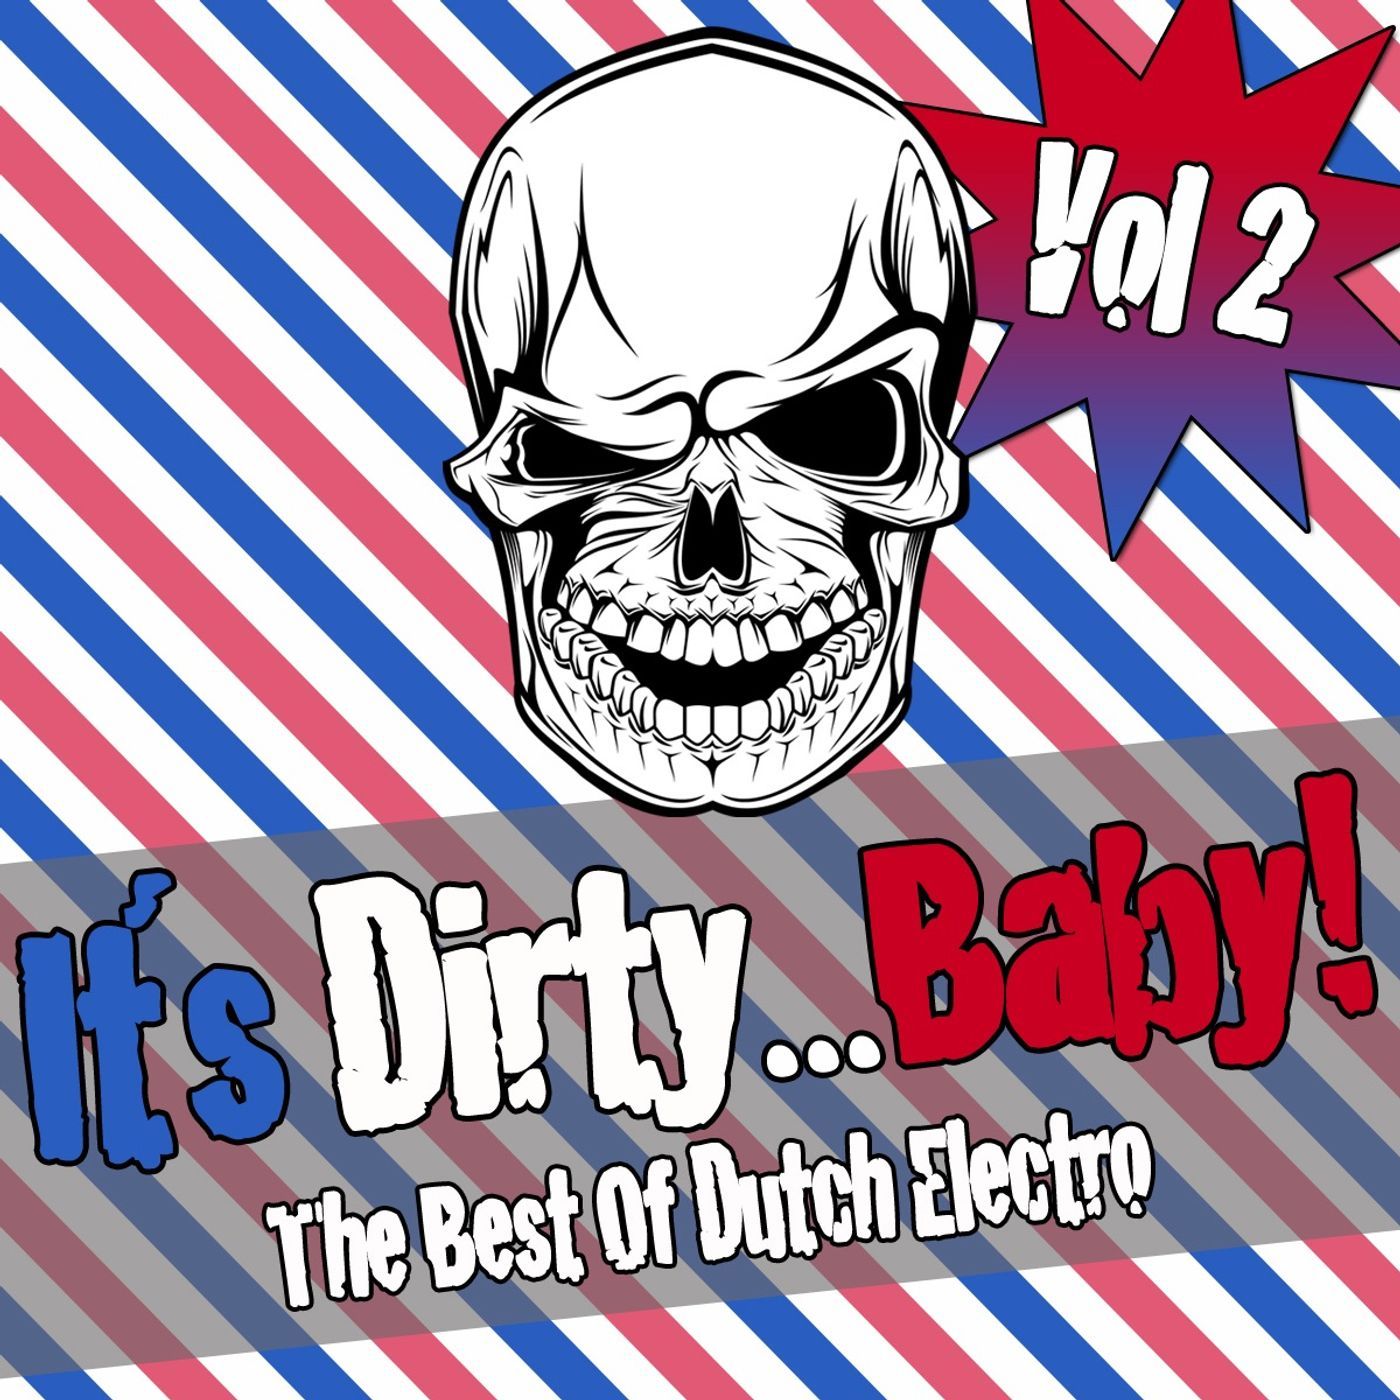 It's Dirty...Baby! - The Best Of Dutch Electro Vol. 2